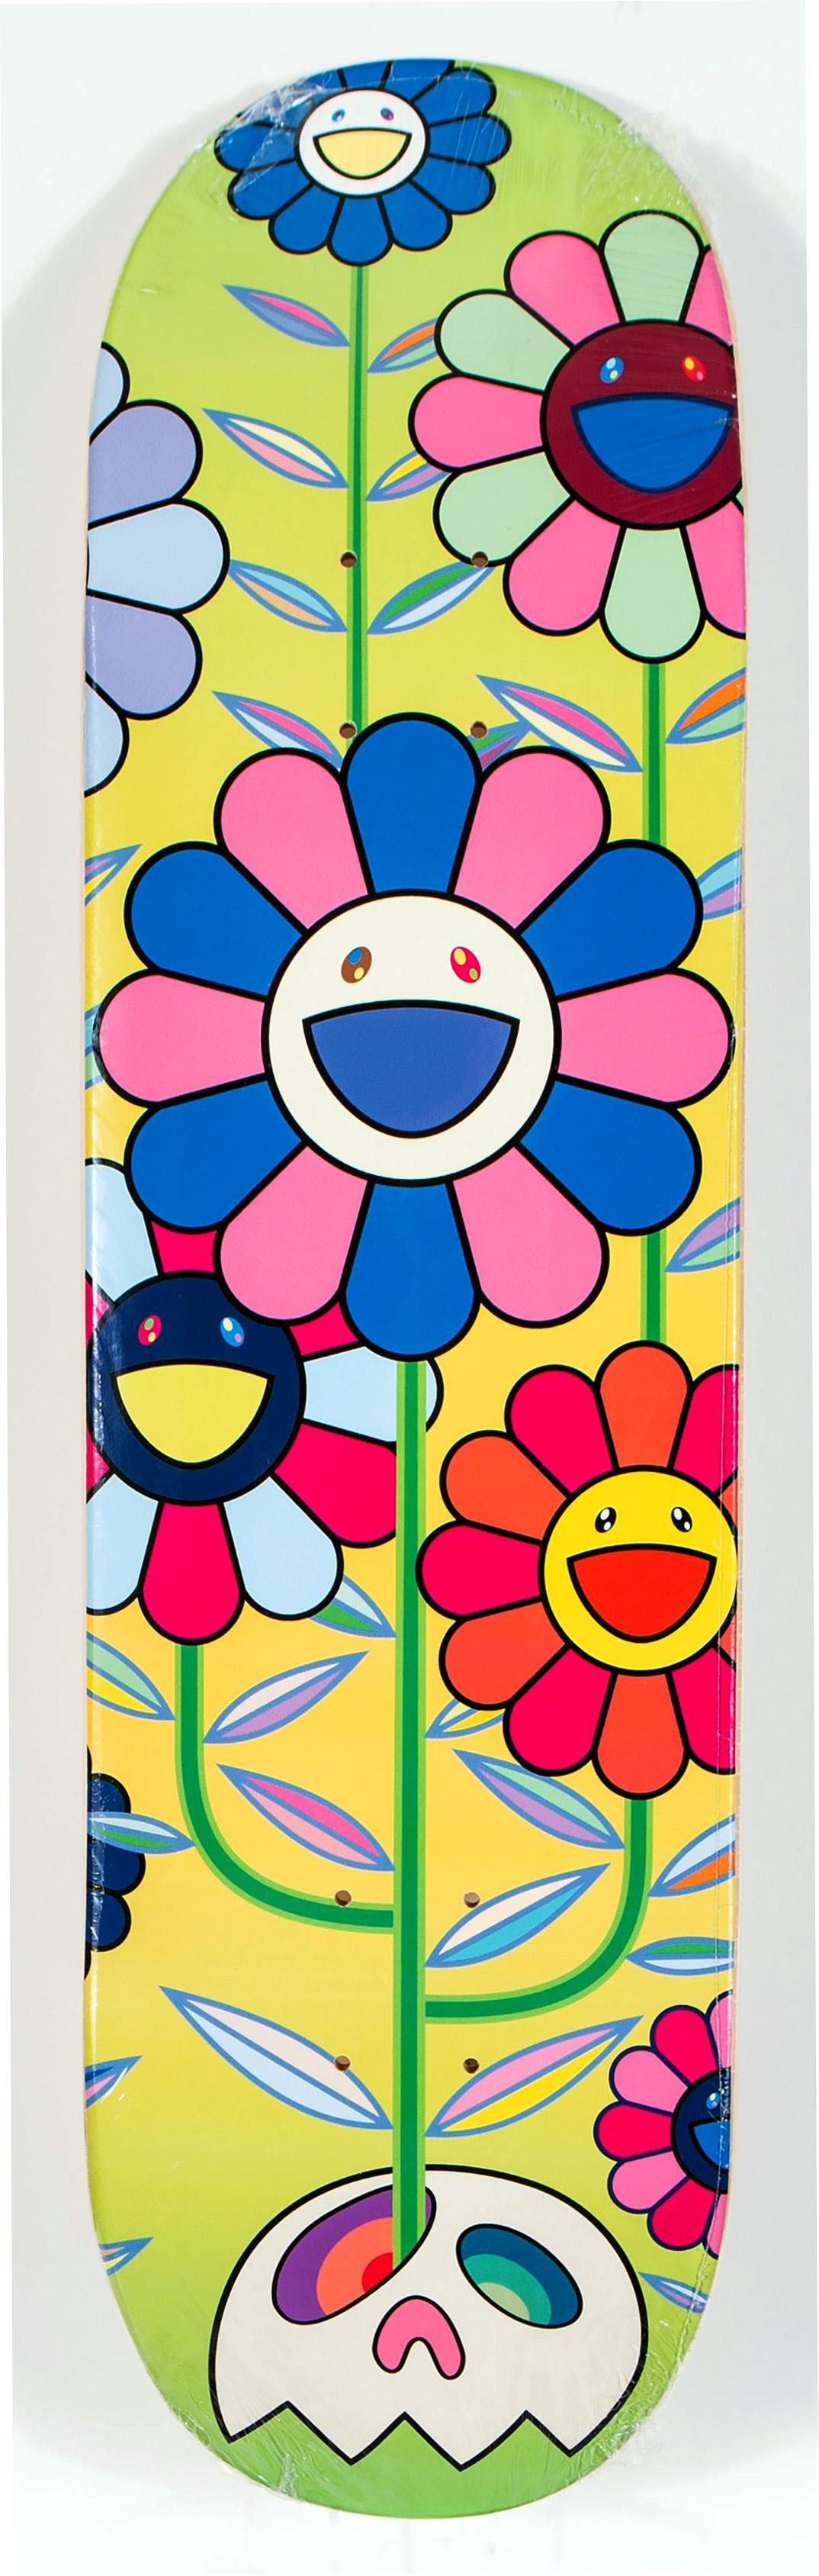 Takashi Murakami Flowers Skate Deck
A vibrant piece of Takashi Murakami wall art produced as a completely sold out, limited series in 2019 in conjunction with Complexcon and Kaikai Kiki co. This deck is new in its original packaging. A brilliant